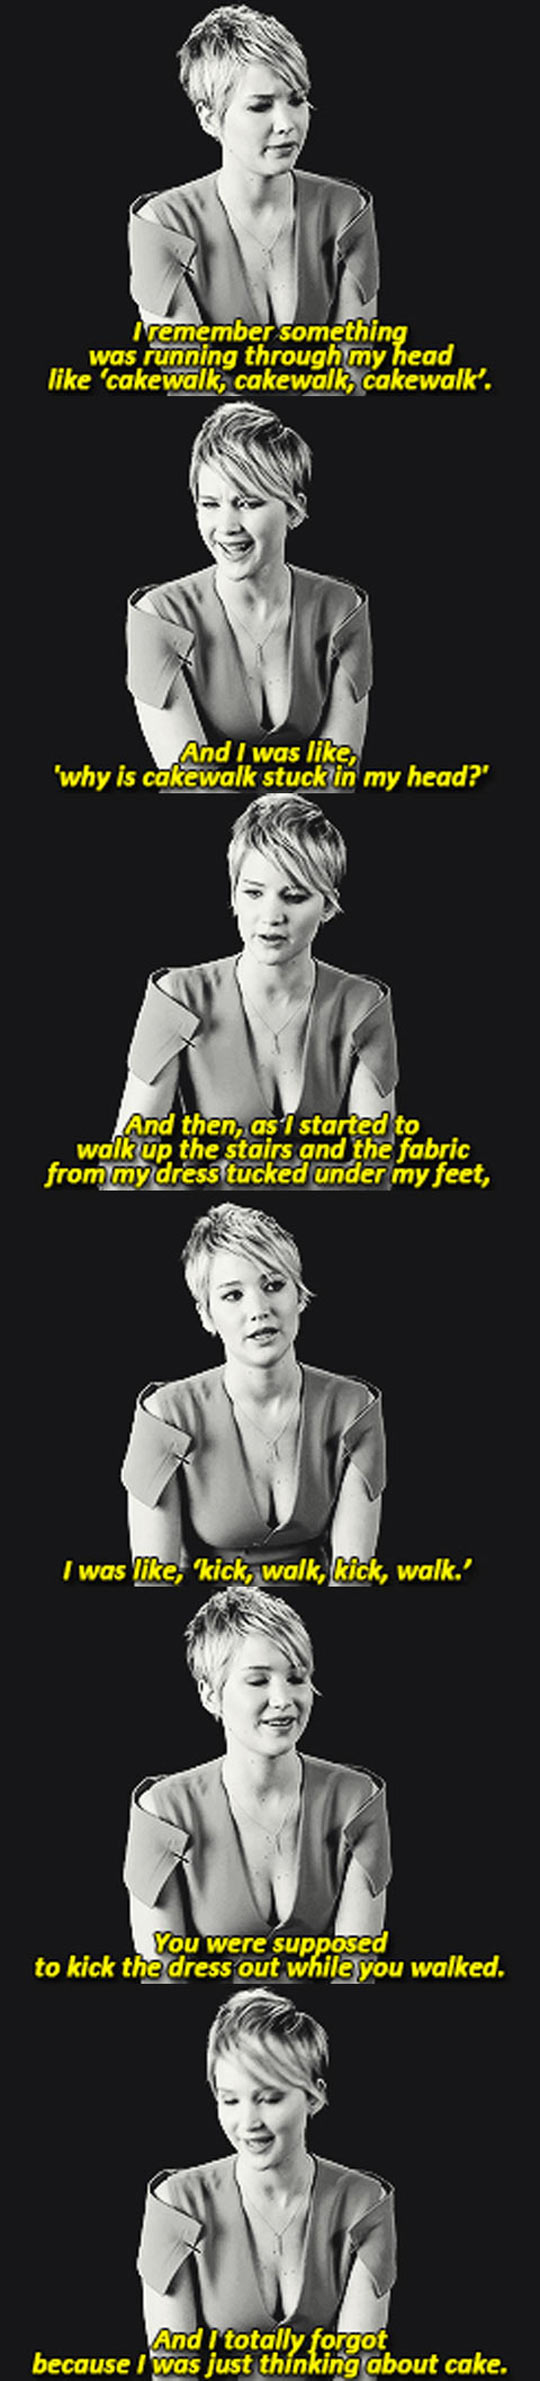 Jennifer+Lawrence+Talks+About+Her+Famous+Fall+At+The+Oscars